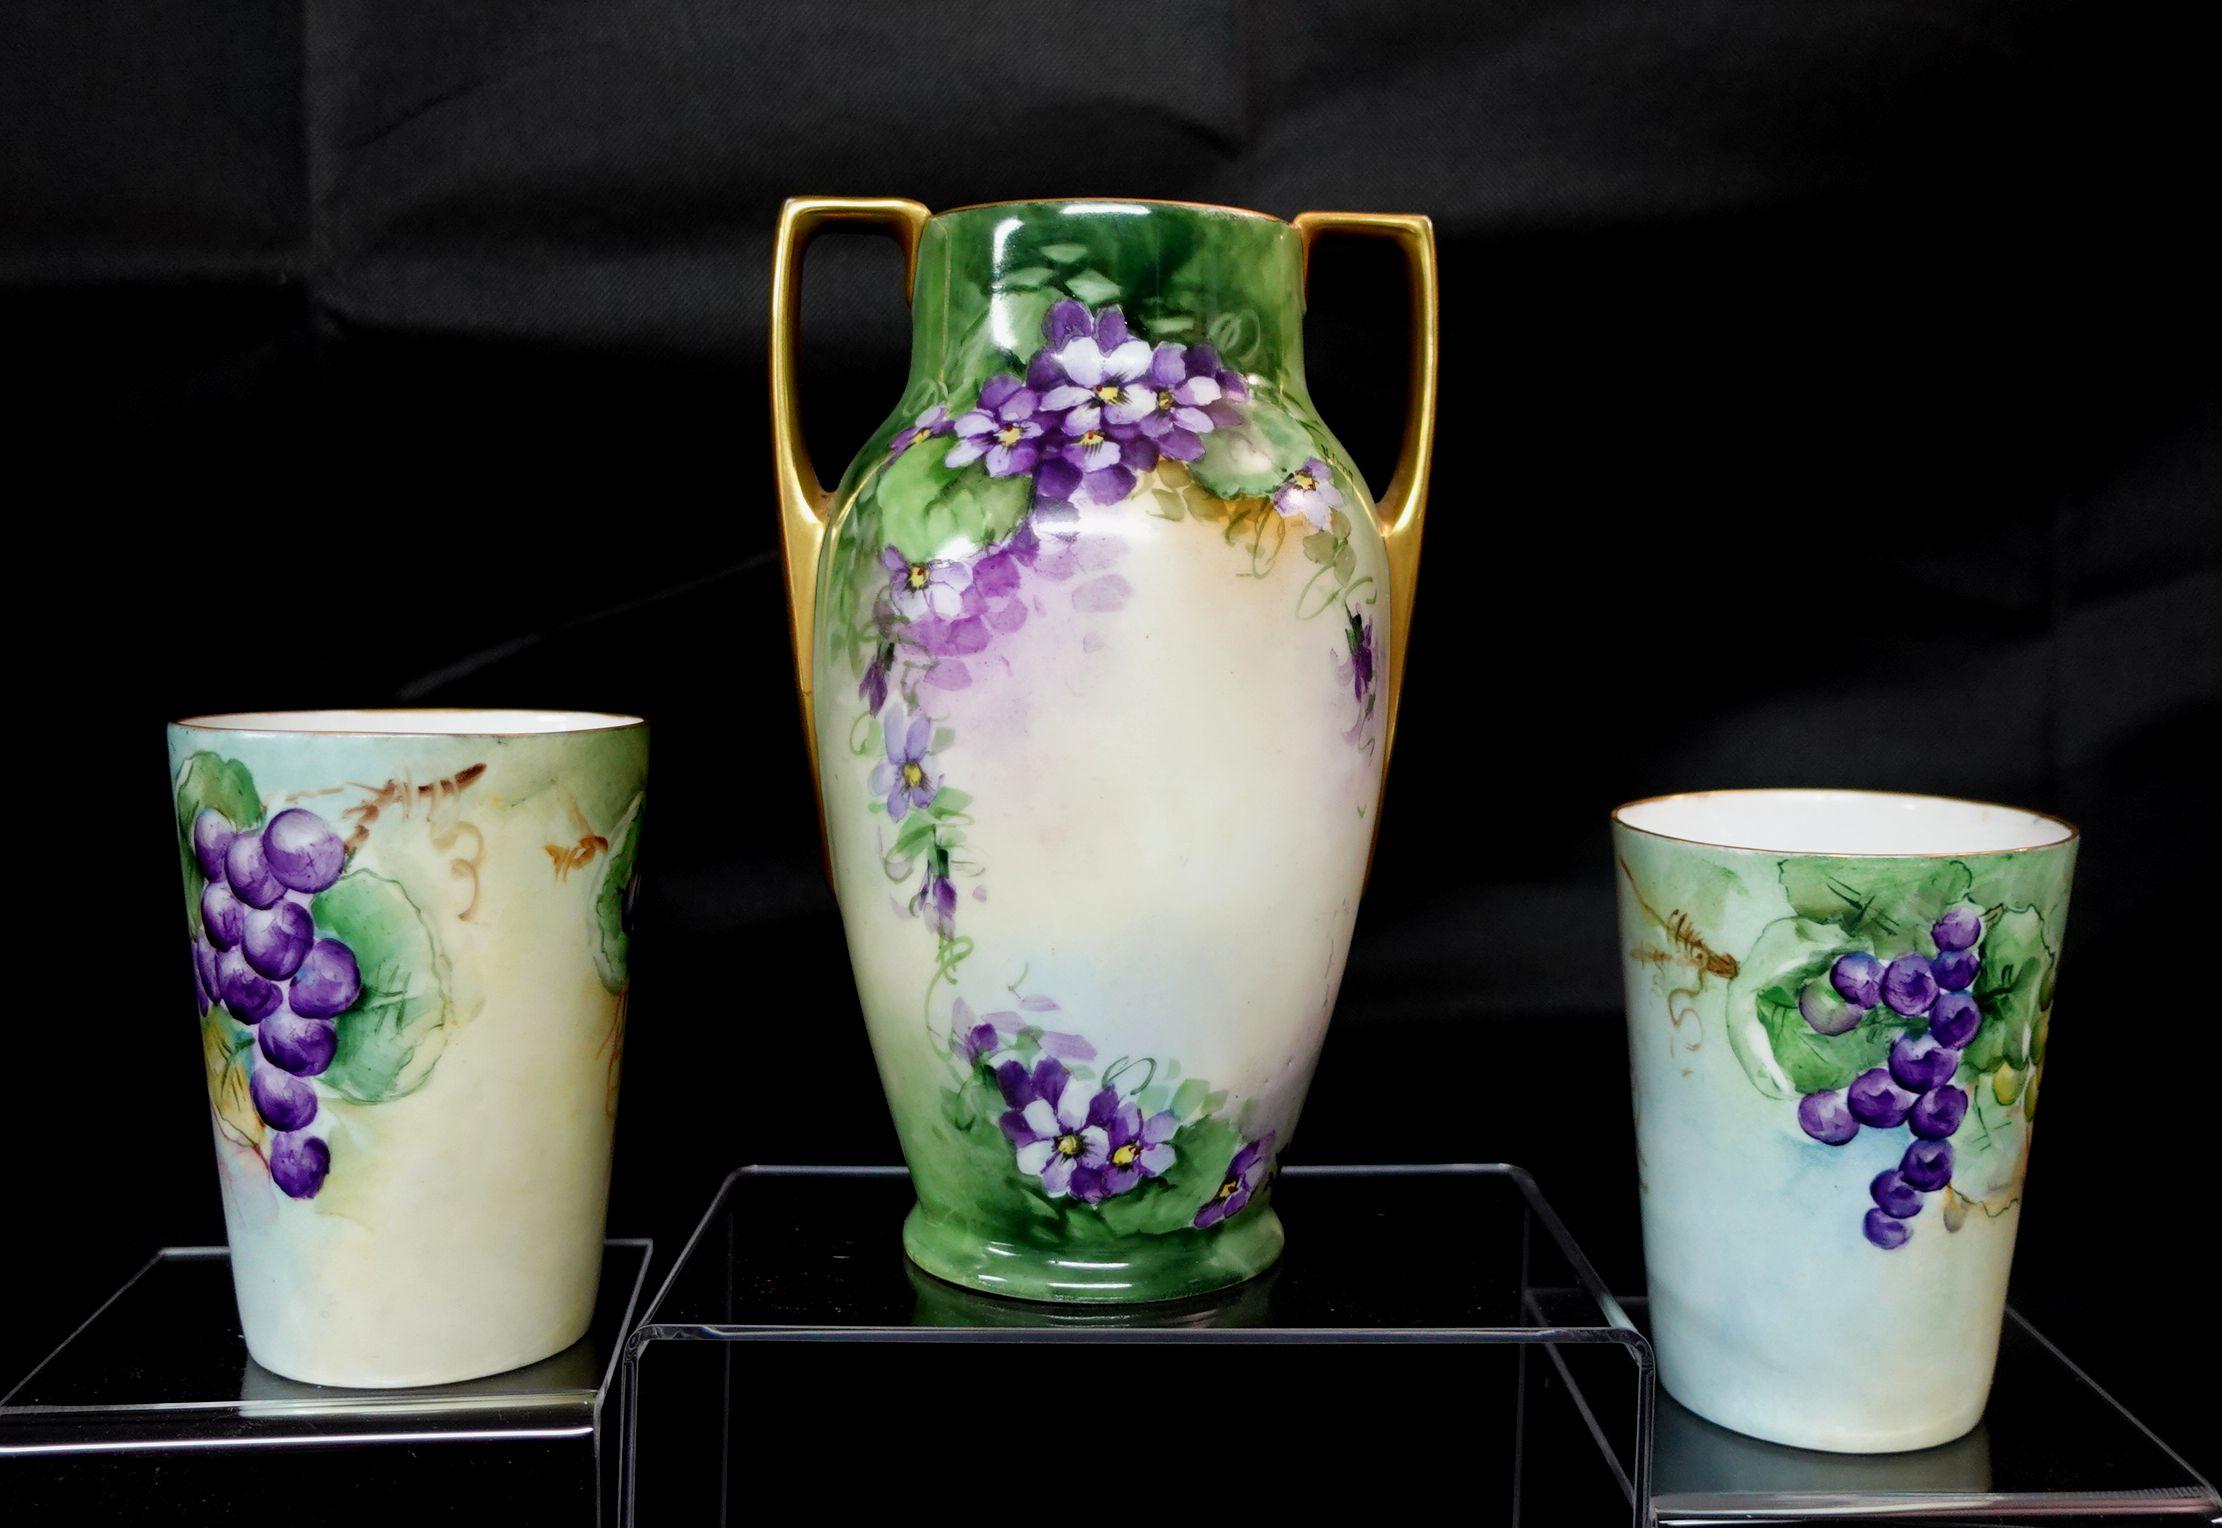 A wonderful Antique M.Z. Austria Porcelain Vase and Pair of Cups, all hand-painted with mark, great artwork.

Dimensions: vase 7.5